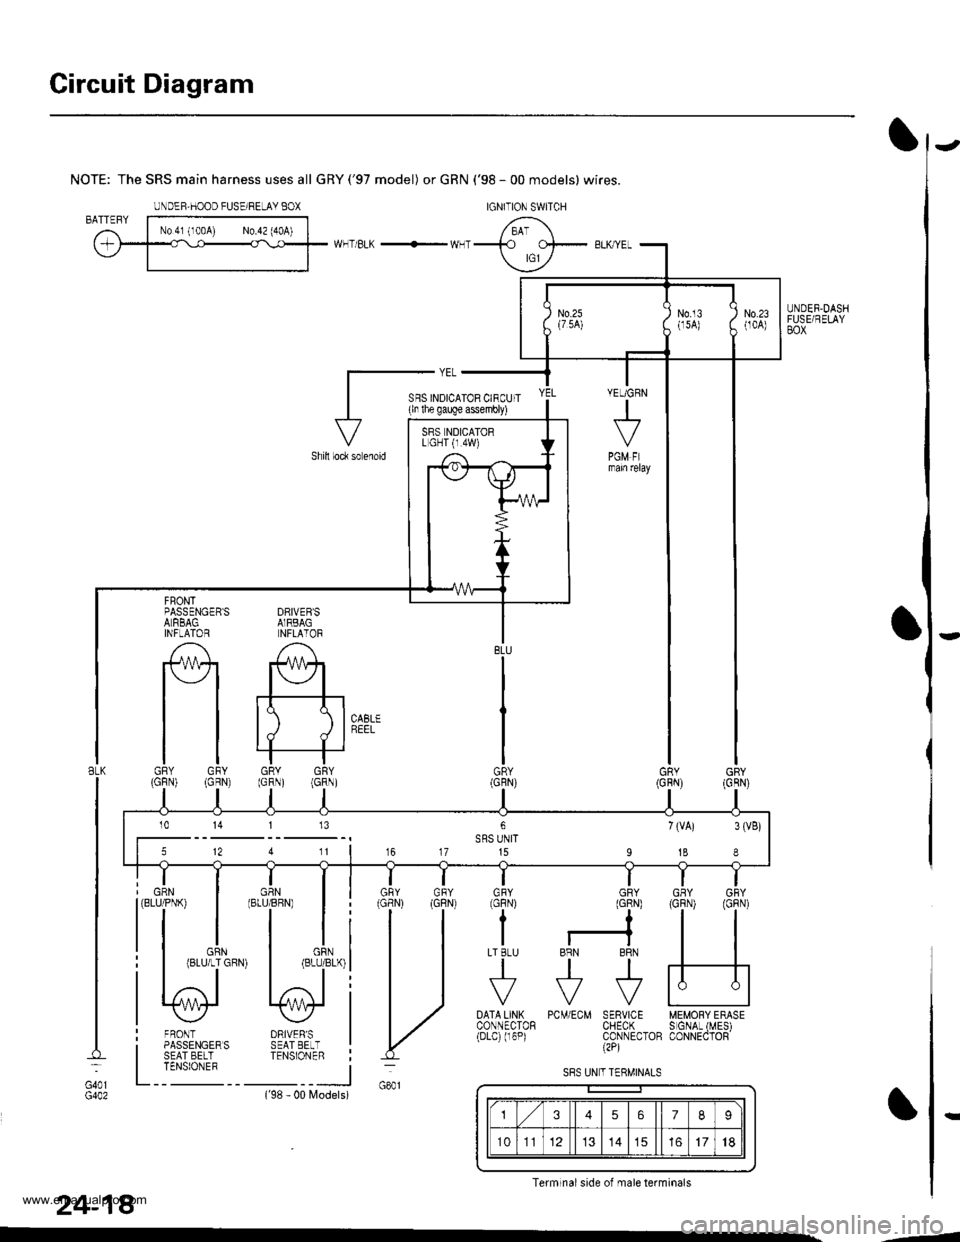 HONDA CR-V 2000 RD1-RD3 / 1.G Service Manual 
Circuit Diagram
UNDER.DASHFUSE/RELAYBOX
NOTE: The SRS main harness uses all GRY(97 model) or GRN (98 - 00 models) wires.
WHT/BLK -- WHT
DRIVEBSAIRBAGNFLATOR
A
#+
tt tll./ d I
GRY GRY(GRN) (GRN)
F